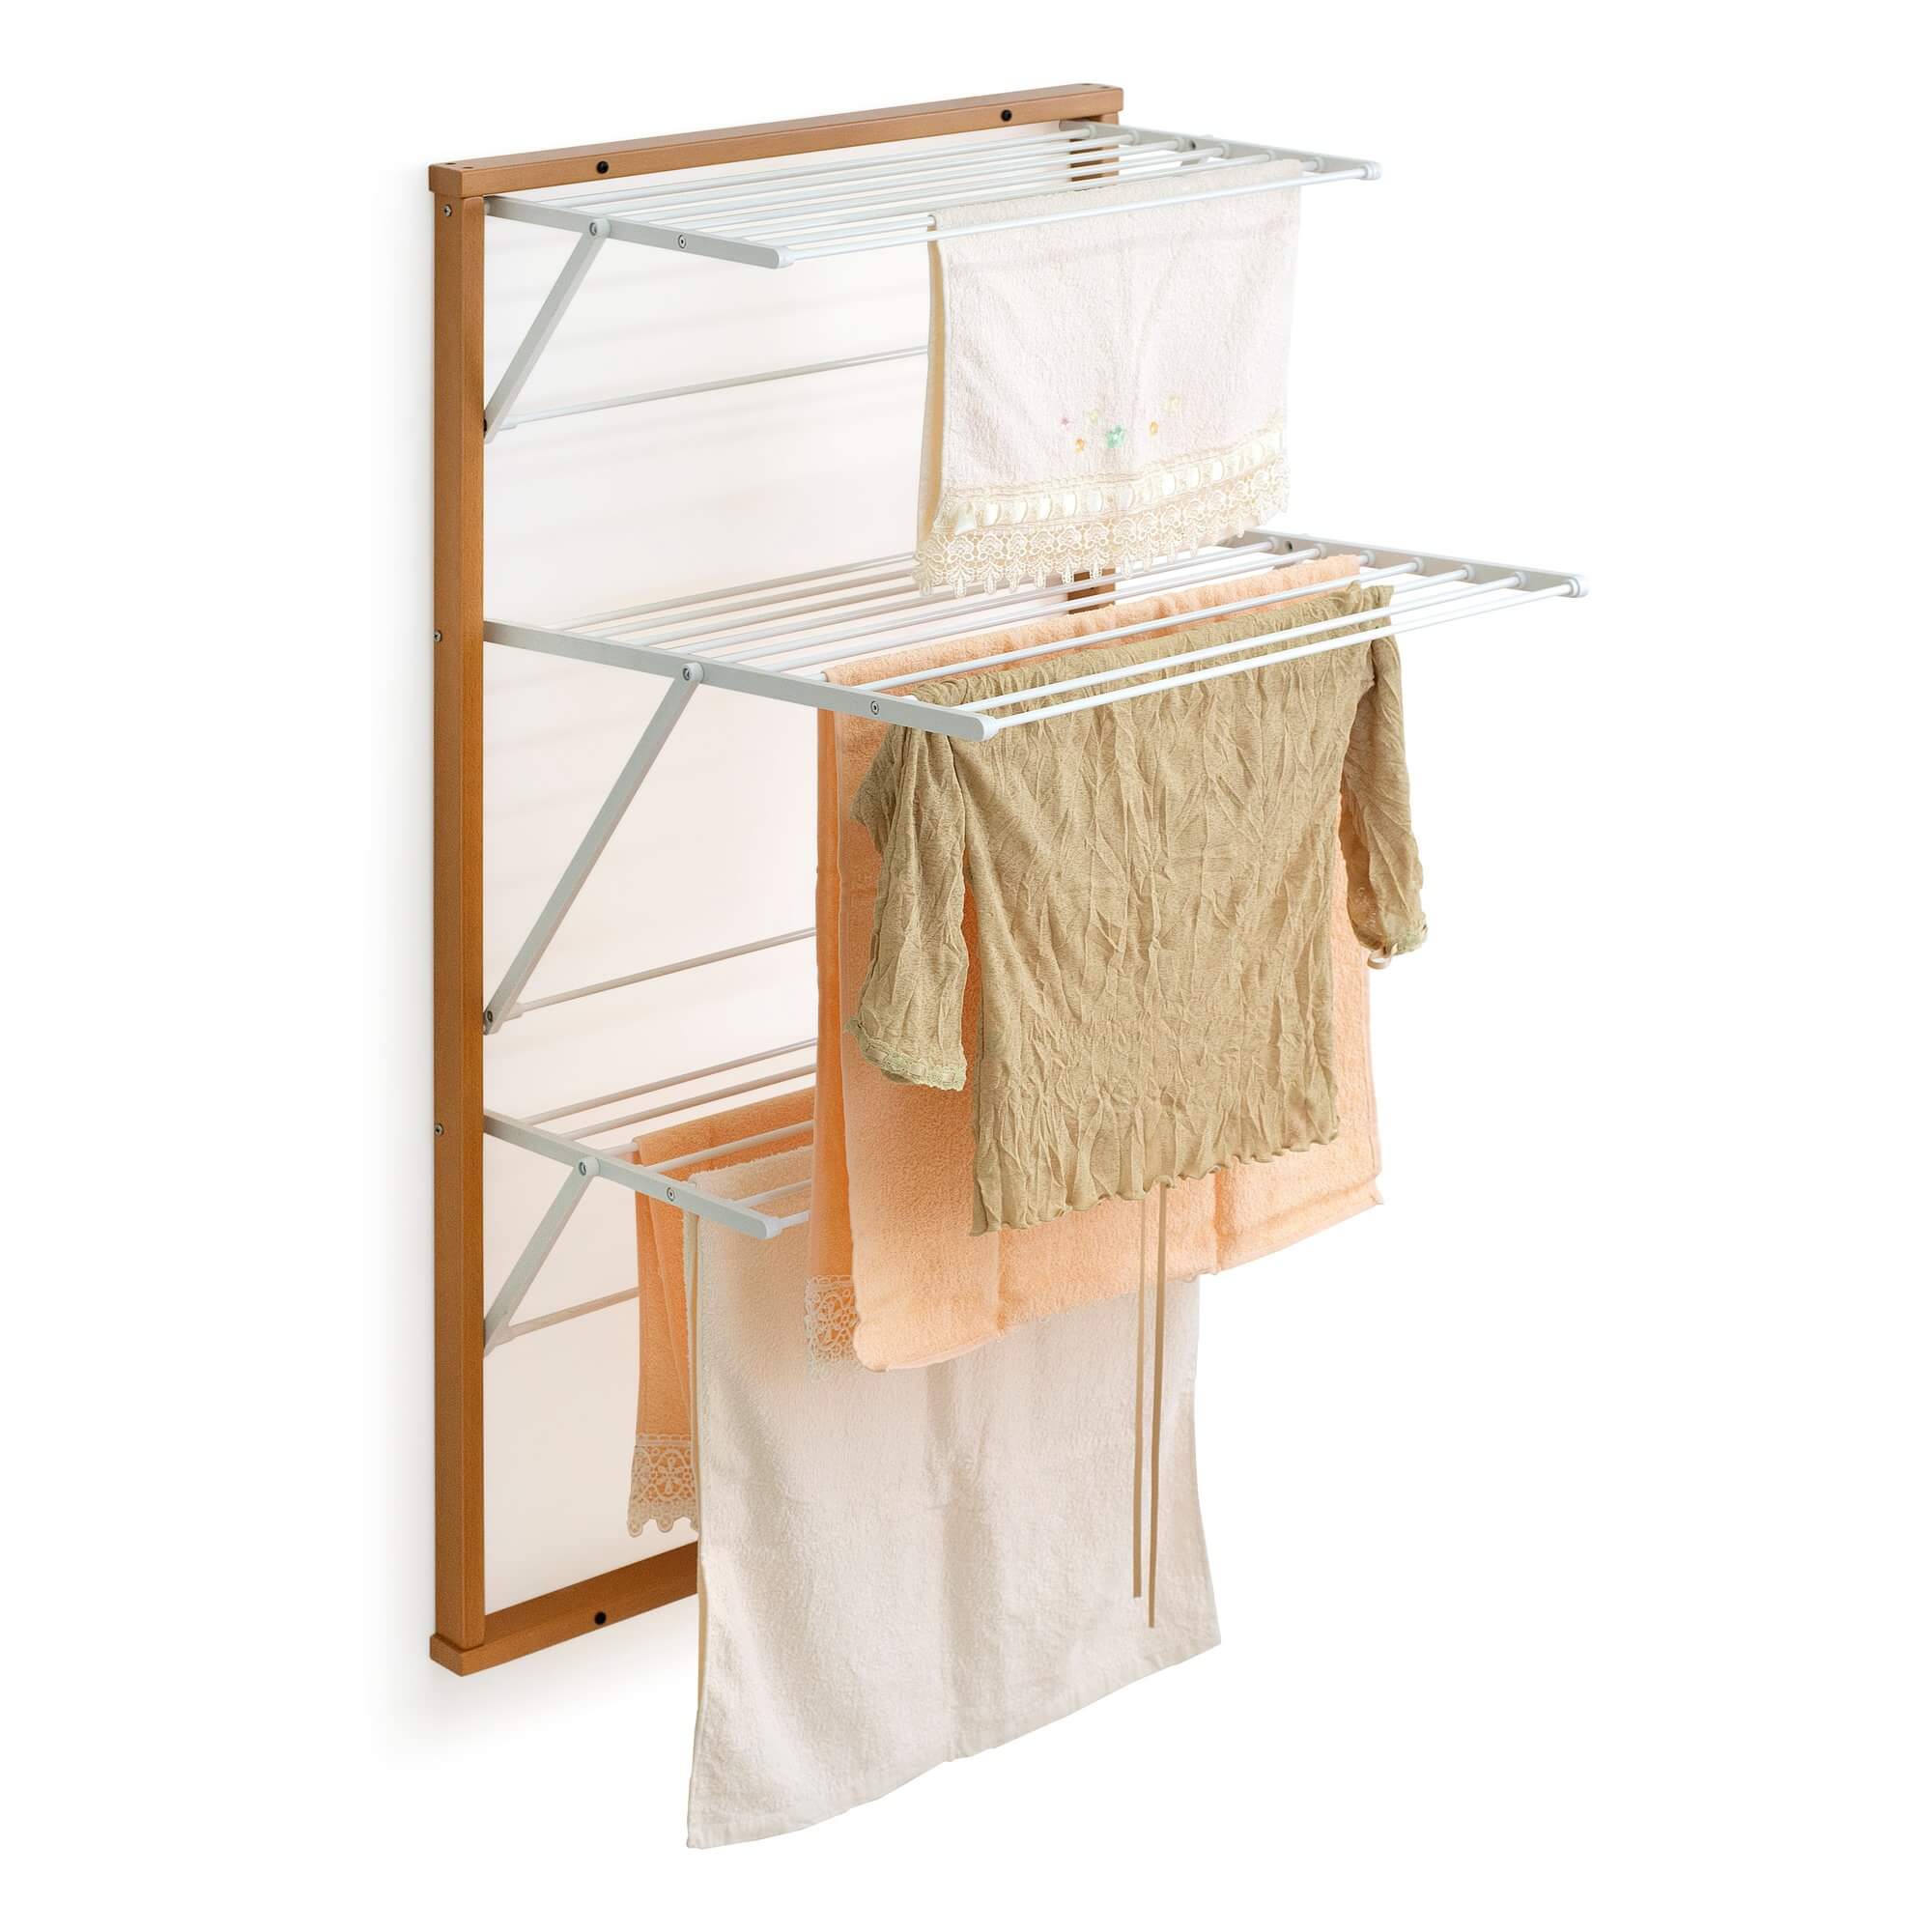 An Italian-made wall-mounted clothes airer with laundry hanging on it.